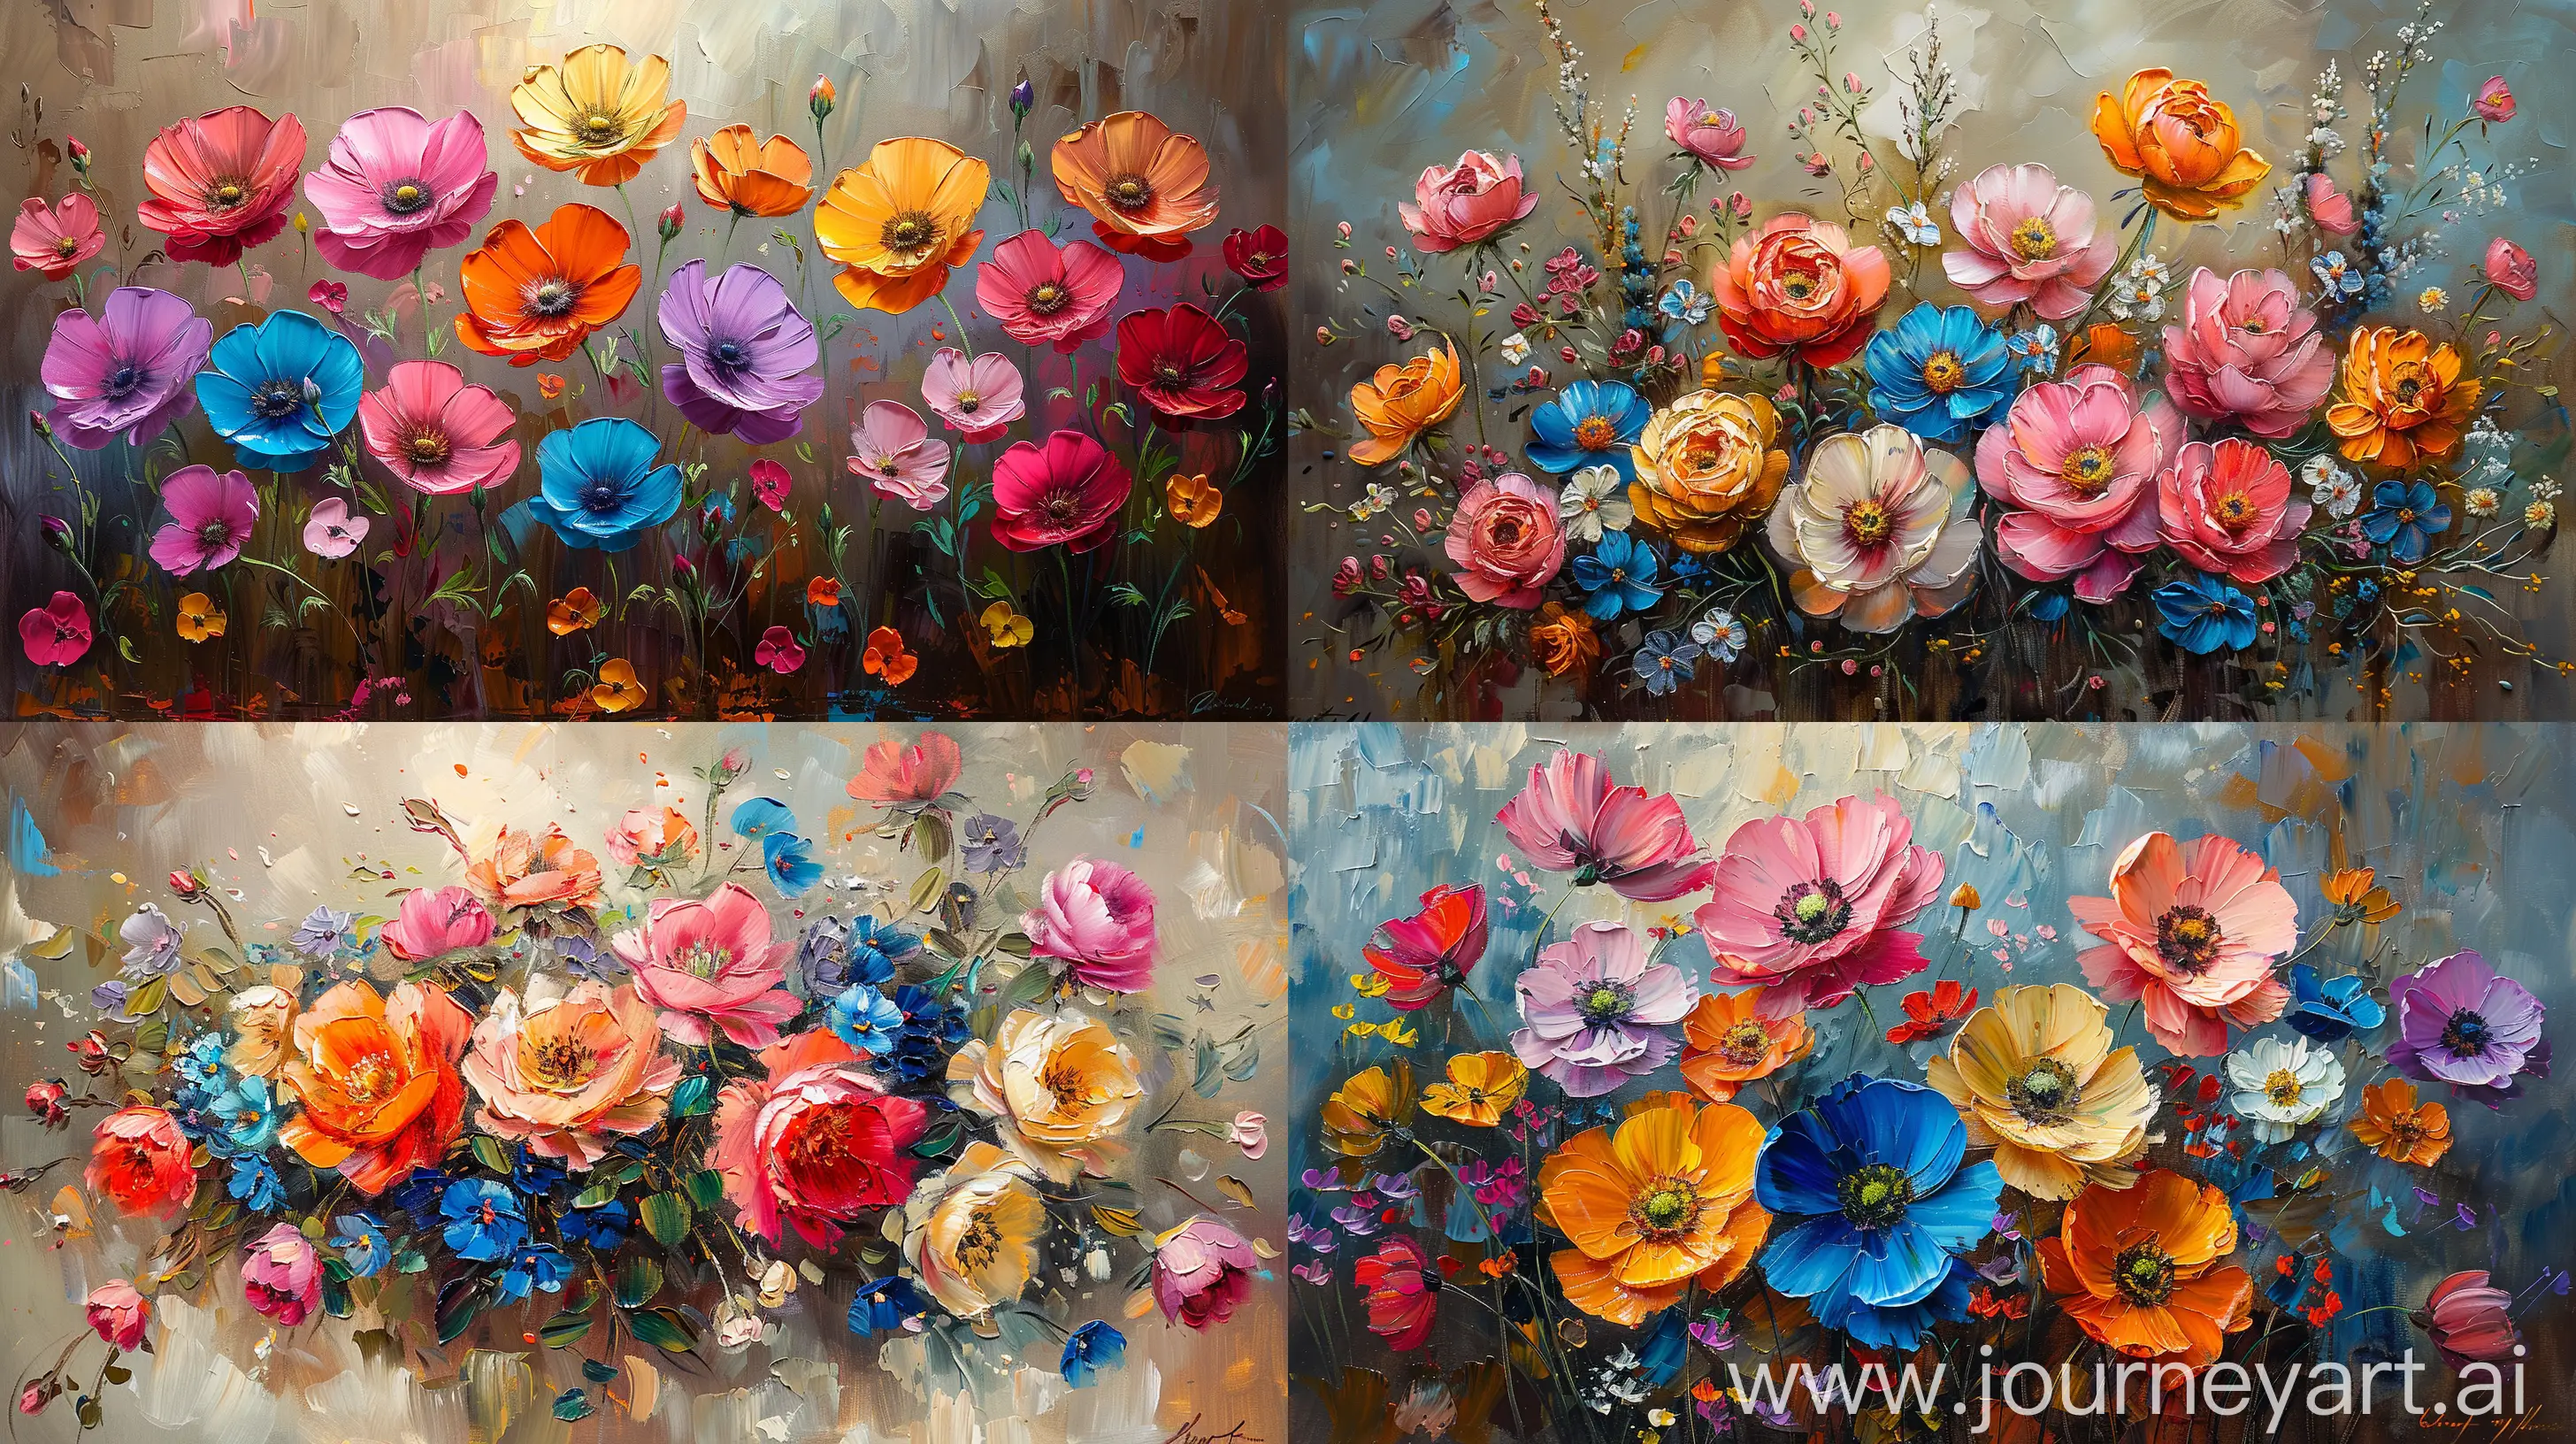 Vibrant-Floral-Oil-Painting-Colorful-Blossoms-in-a-43-Aspect-Ratio